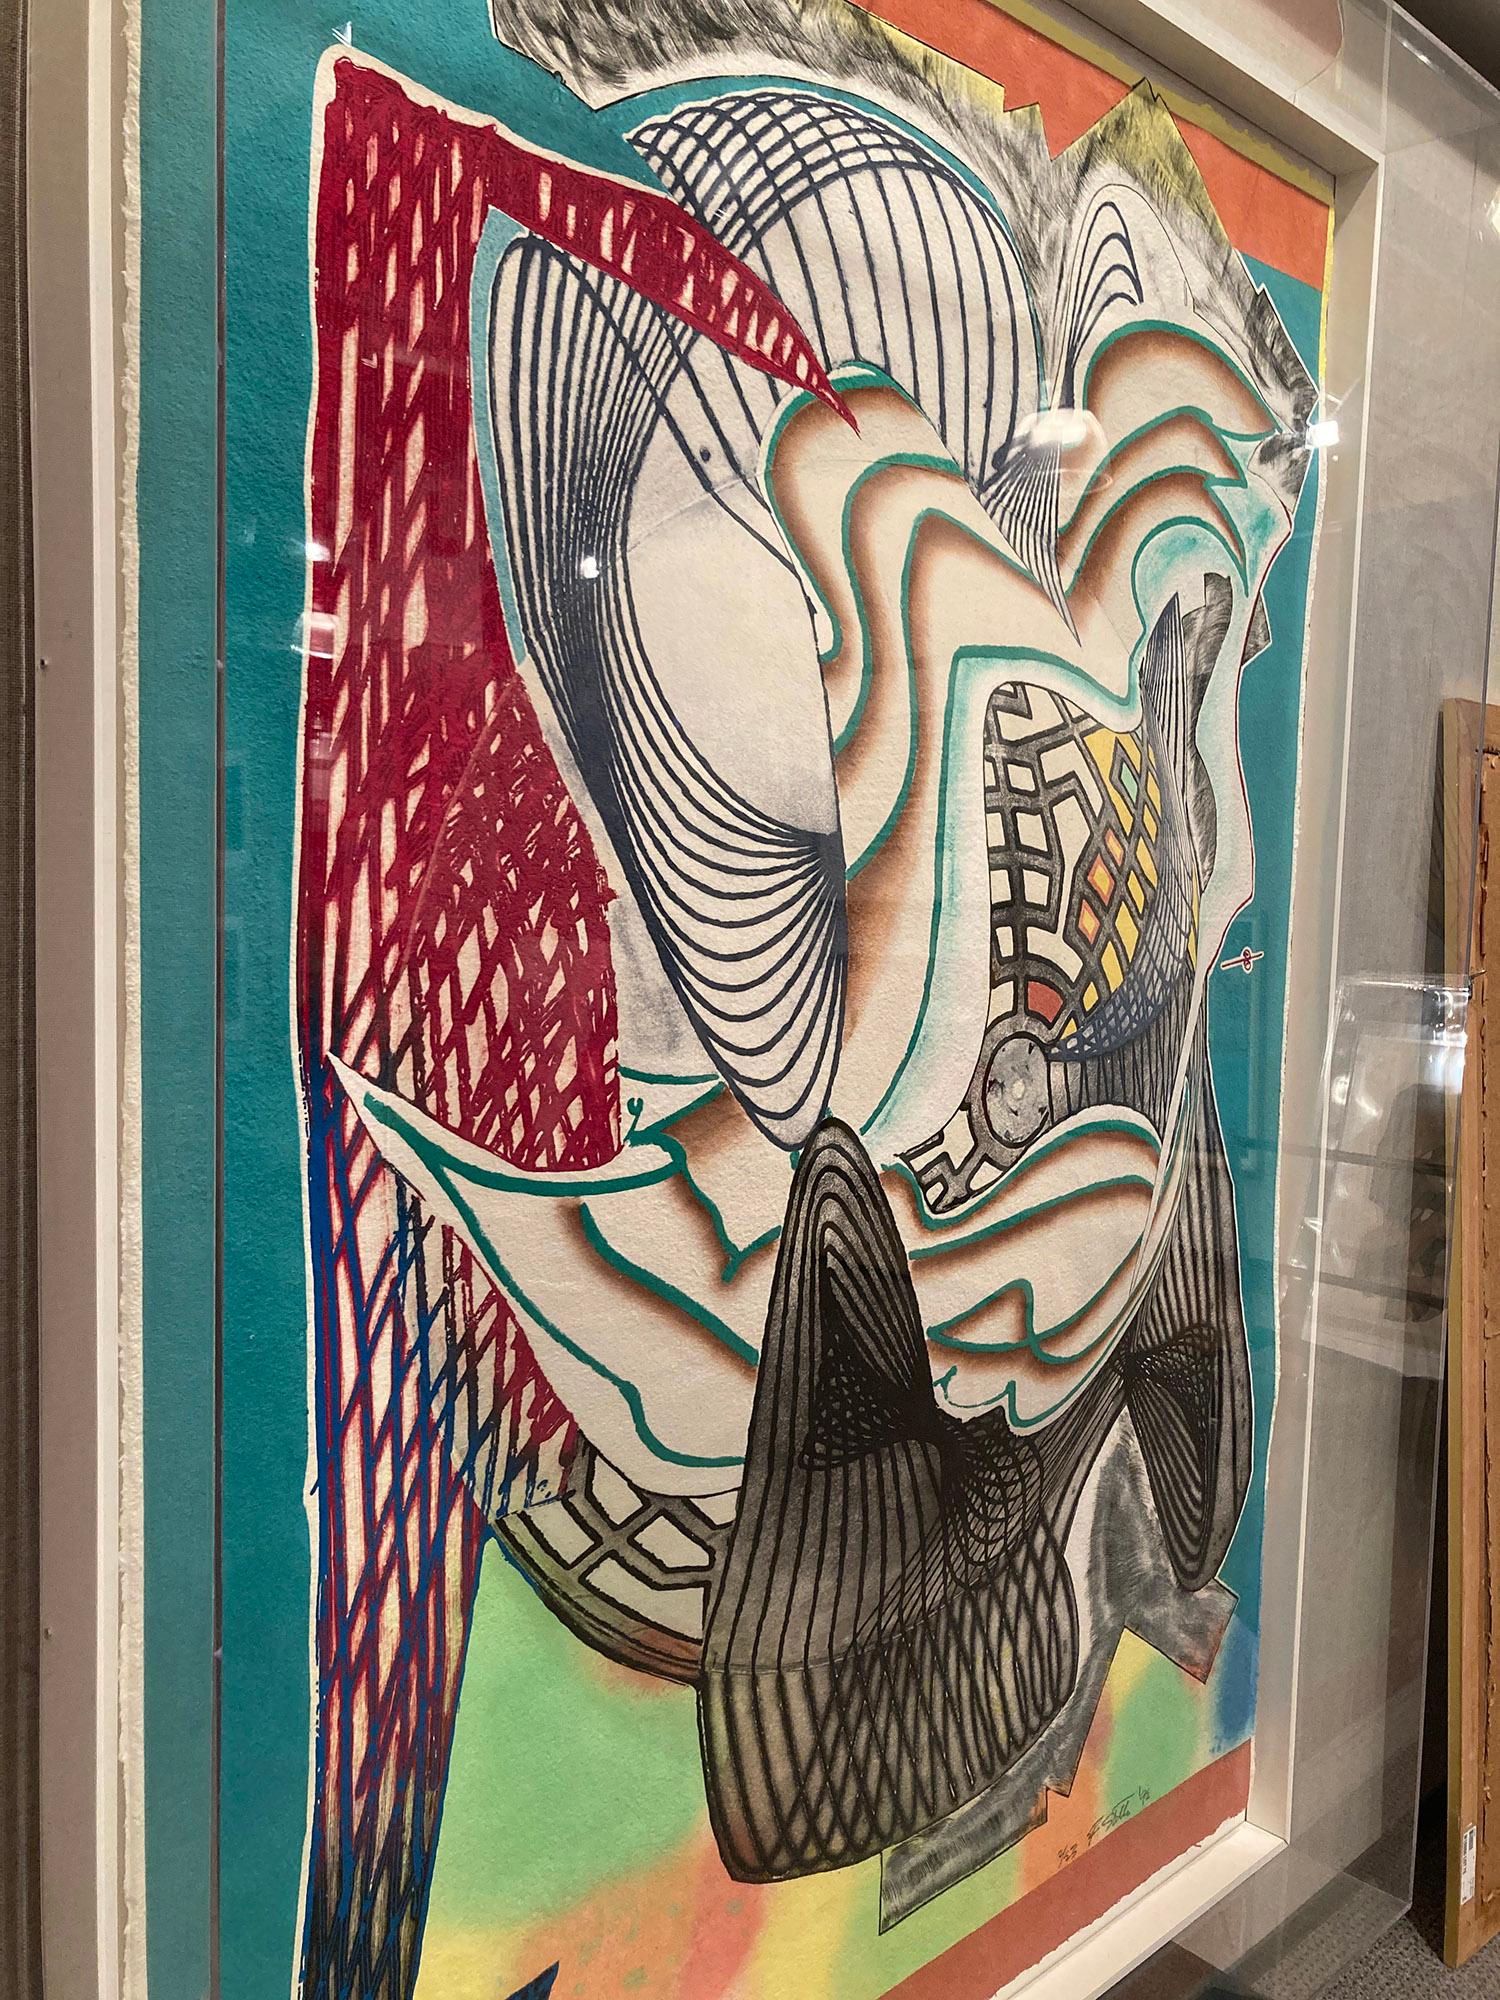 The Funeral (Dome) From Moby Dick Domes, 1992 - Abstract Expressionist Print by Frank Stella